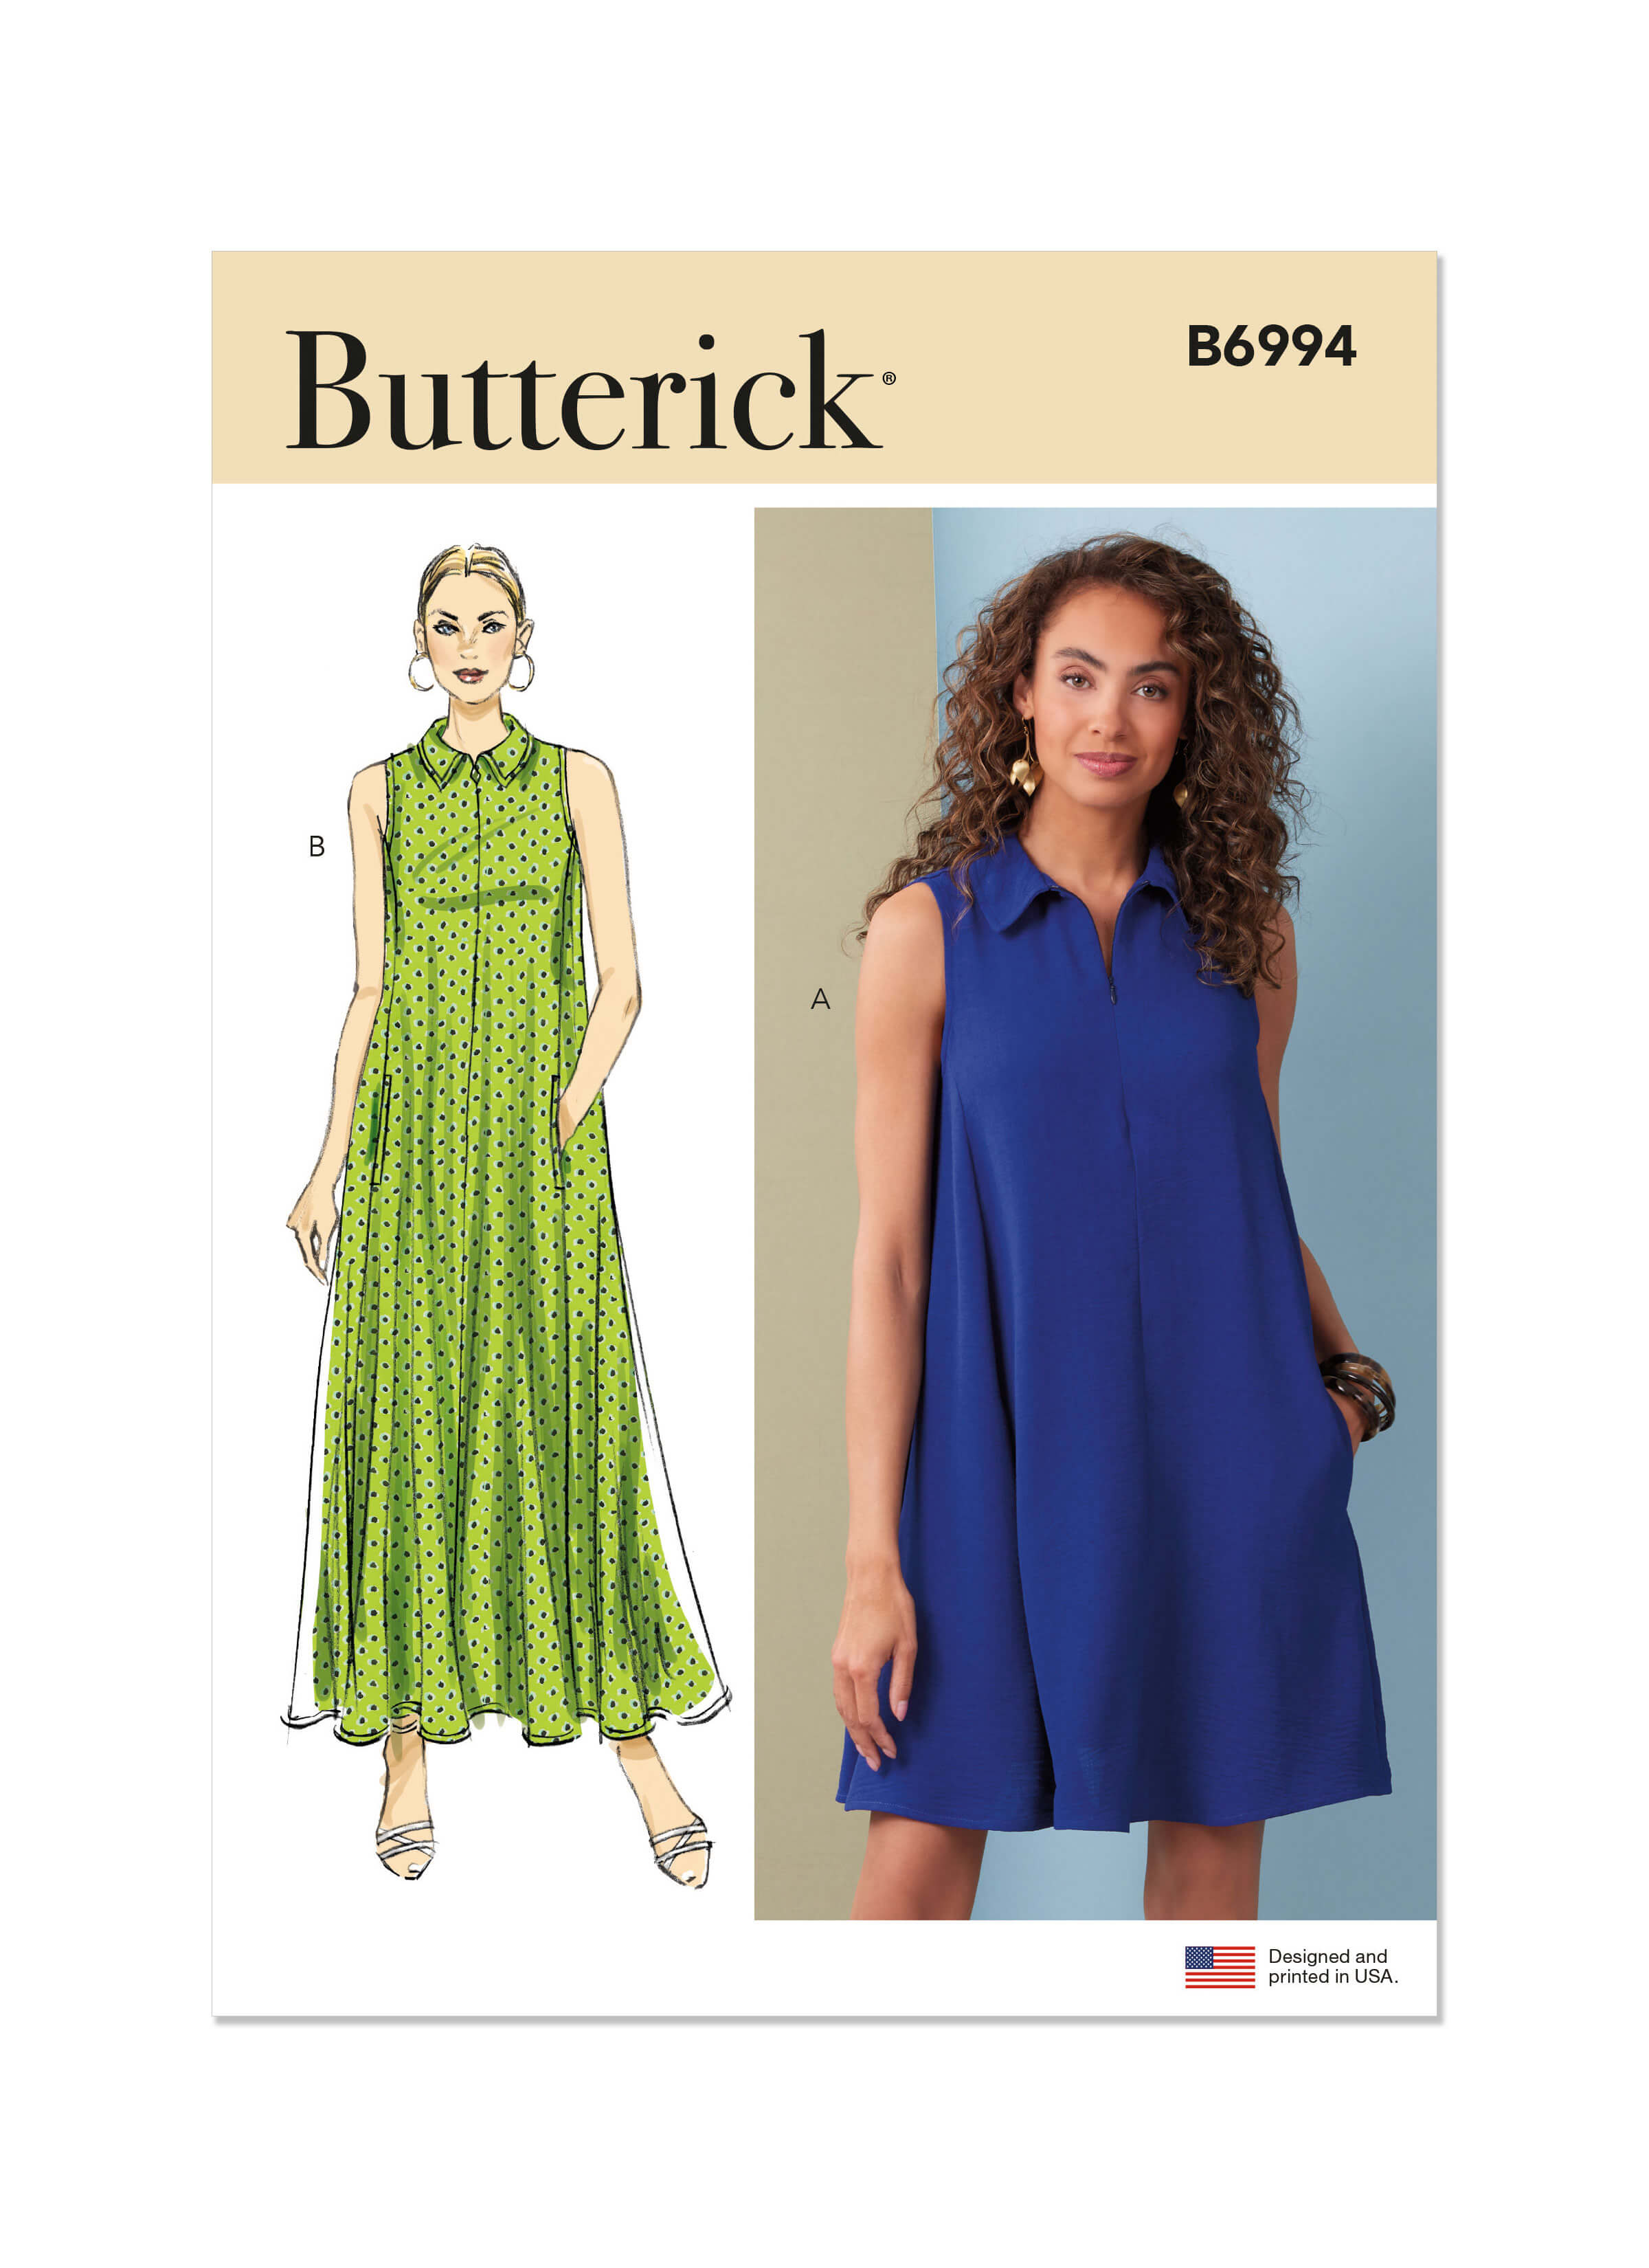 Butterick Sewing Pattern B6994 Misses' Dress in Two Lengths